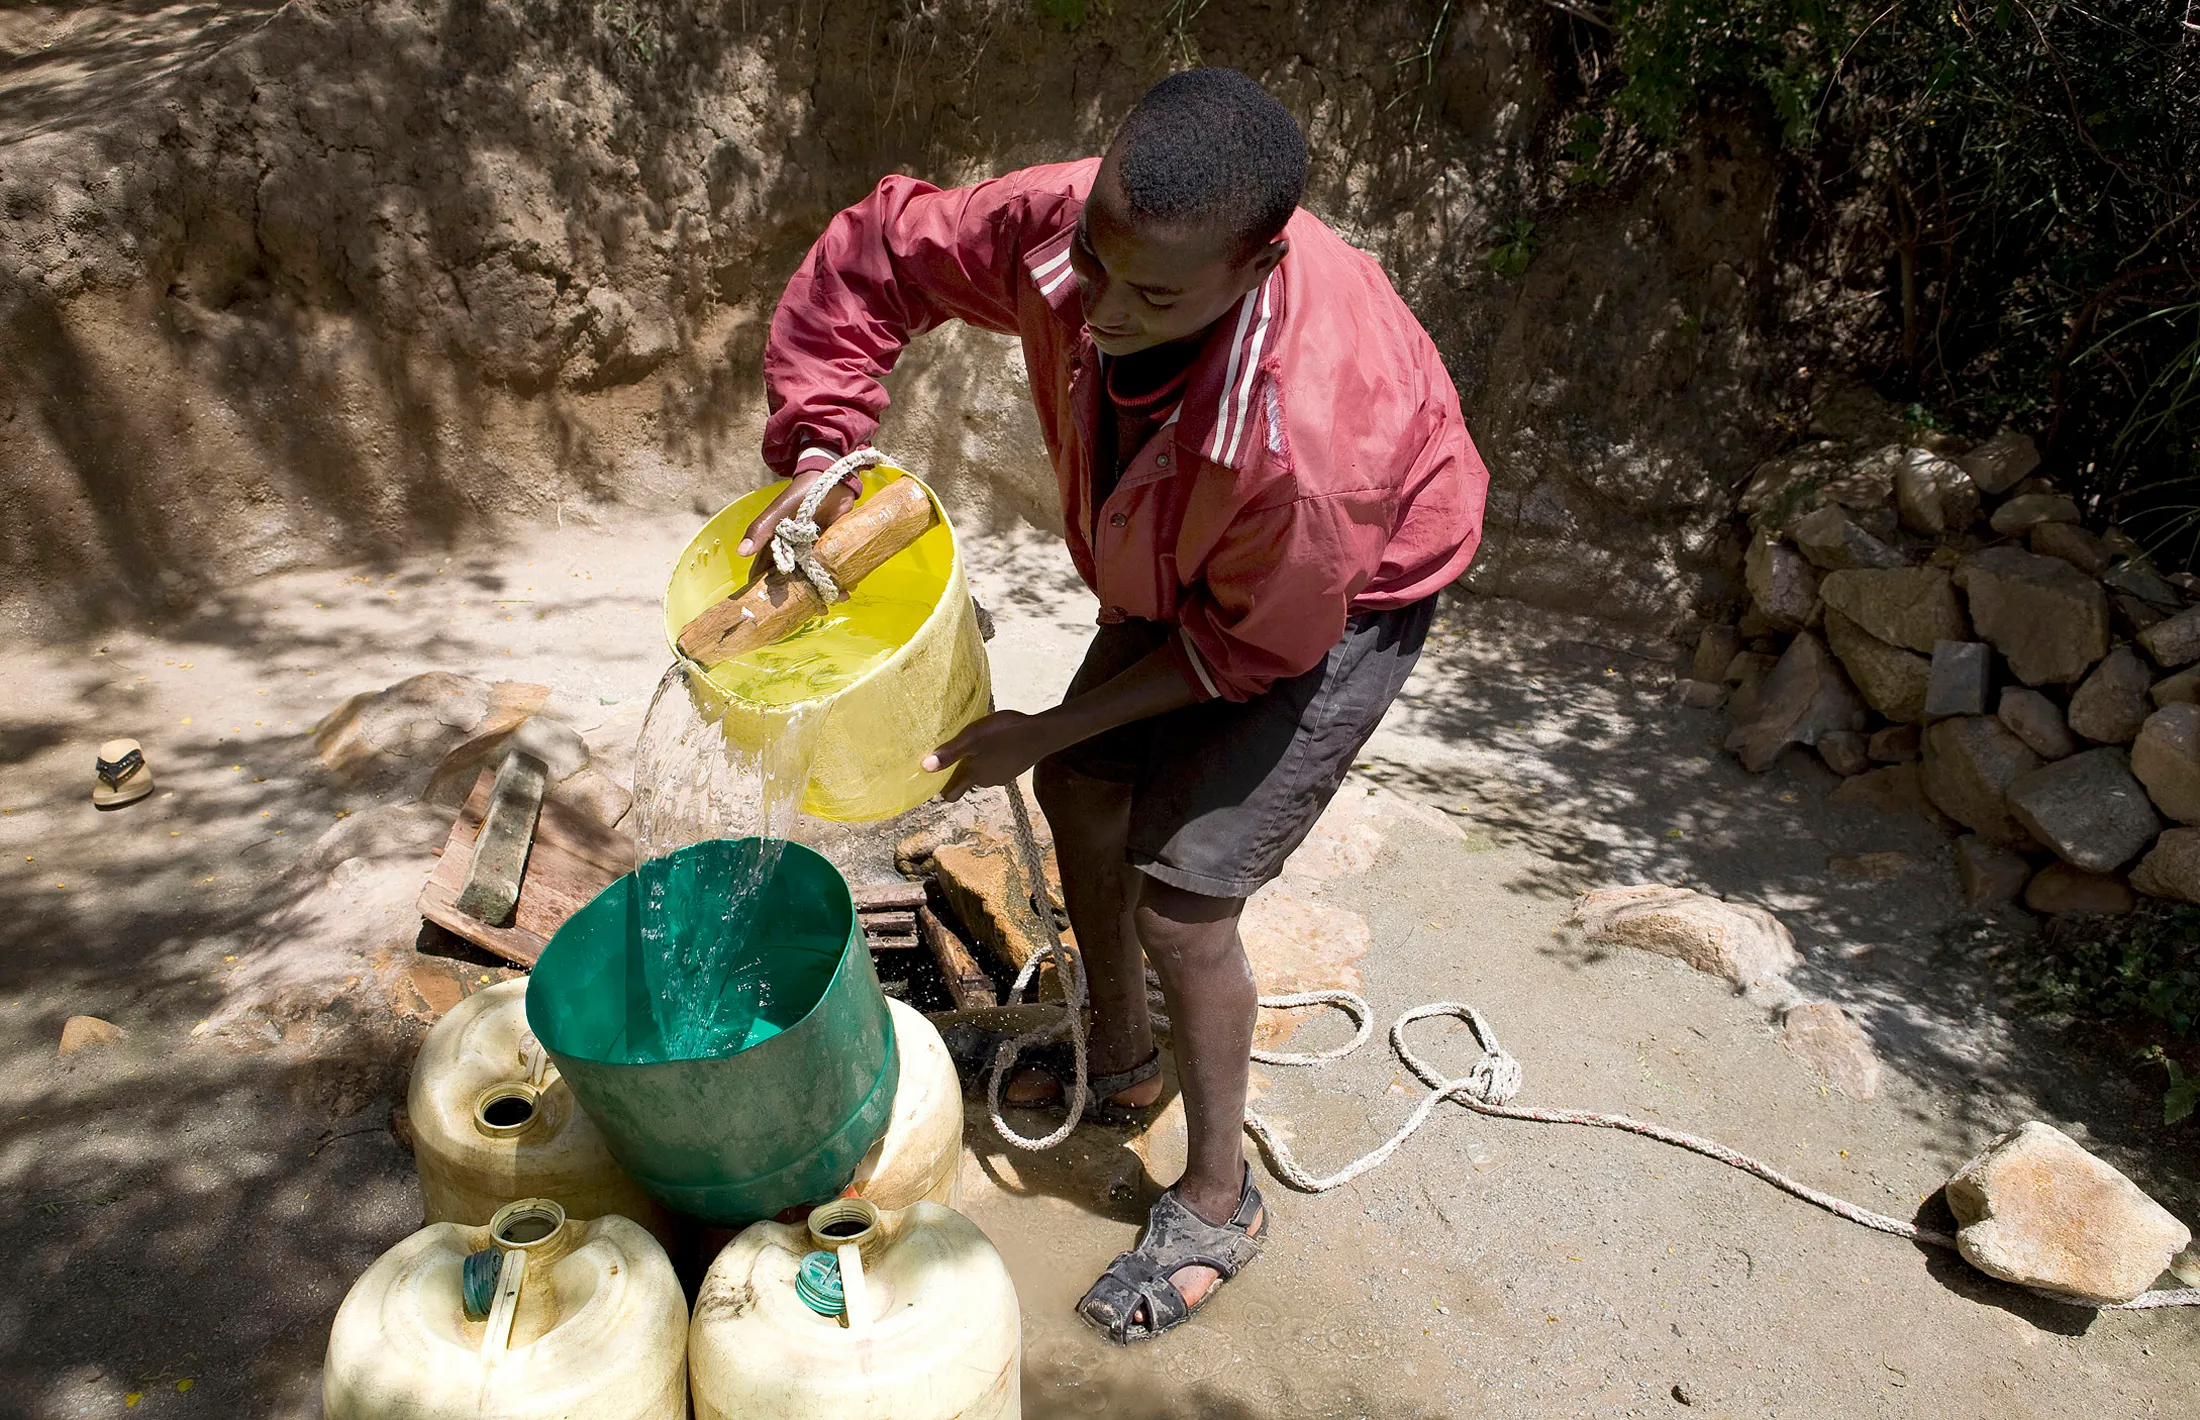 UN Highlights Water Scarcity as Conflict Catalyst in Africa